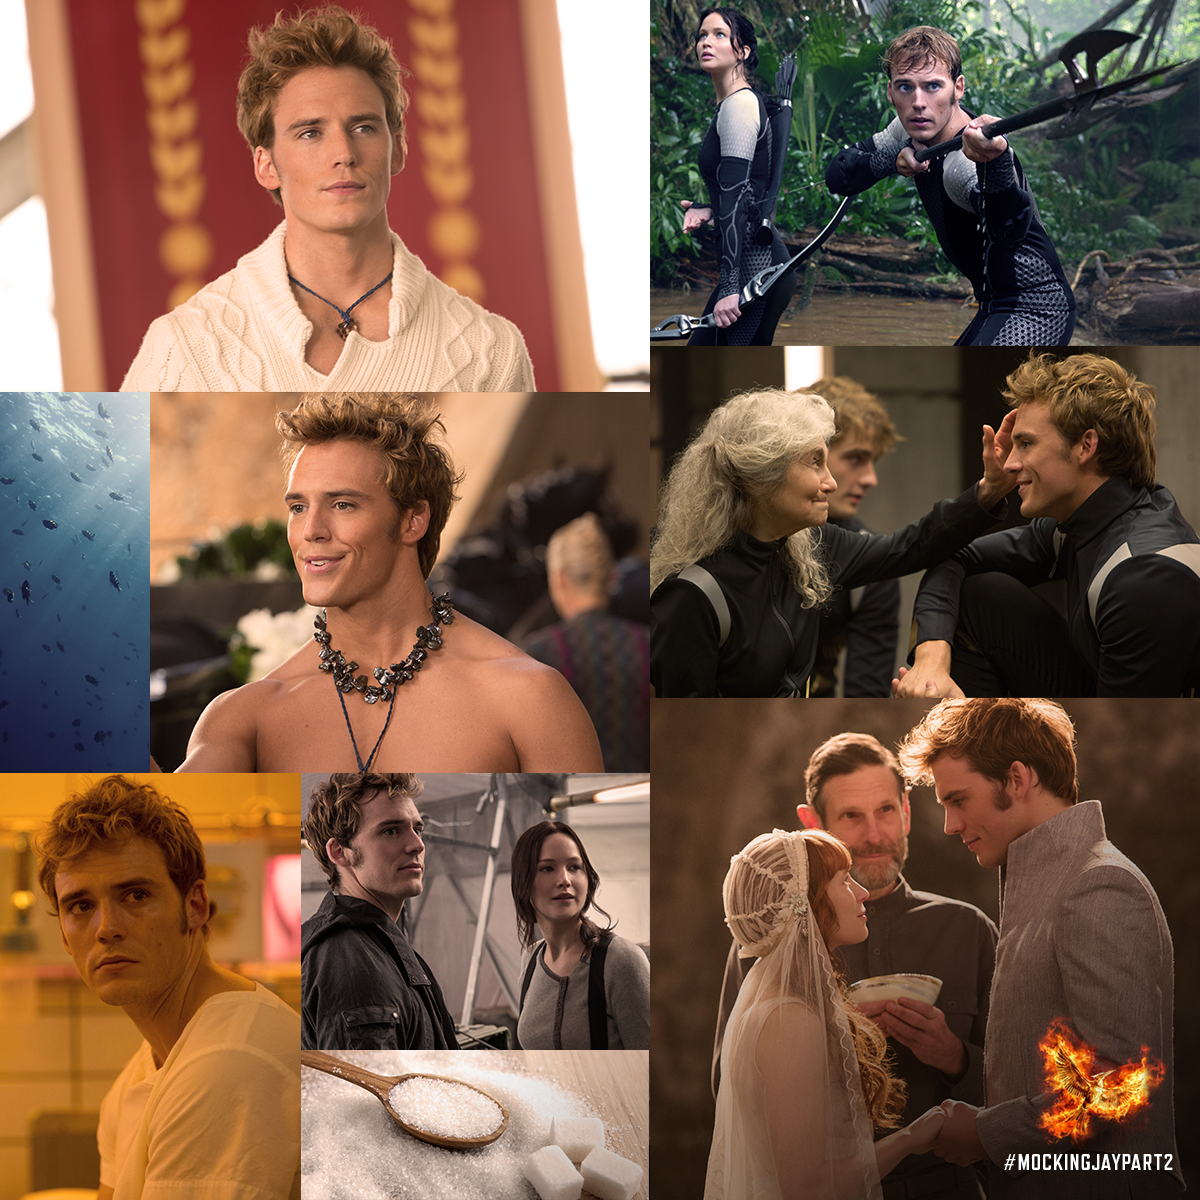 From a confident victor to a thoughtful friend. Finnick Odair. #MockingjayPart2. Hunger games, Hunger games finnick, Hunger games merchandise